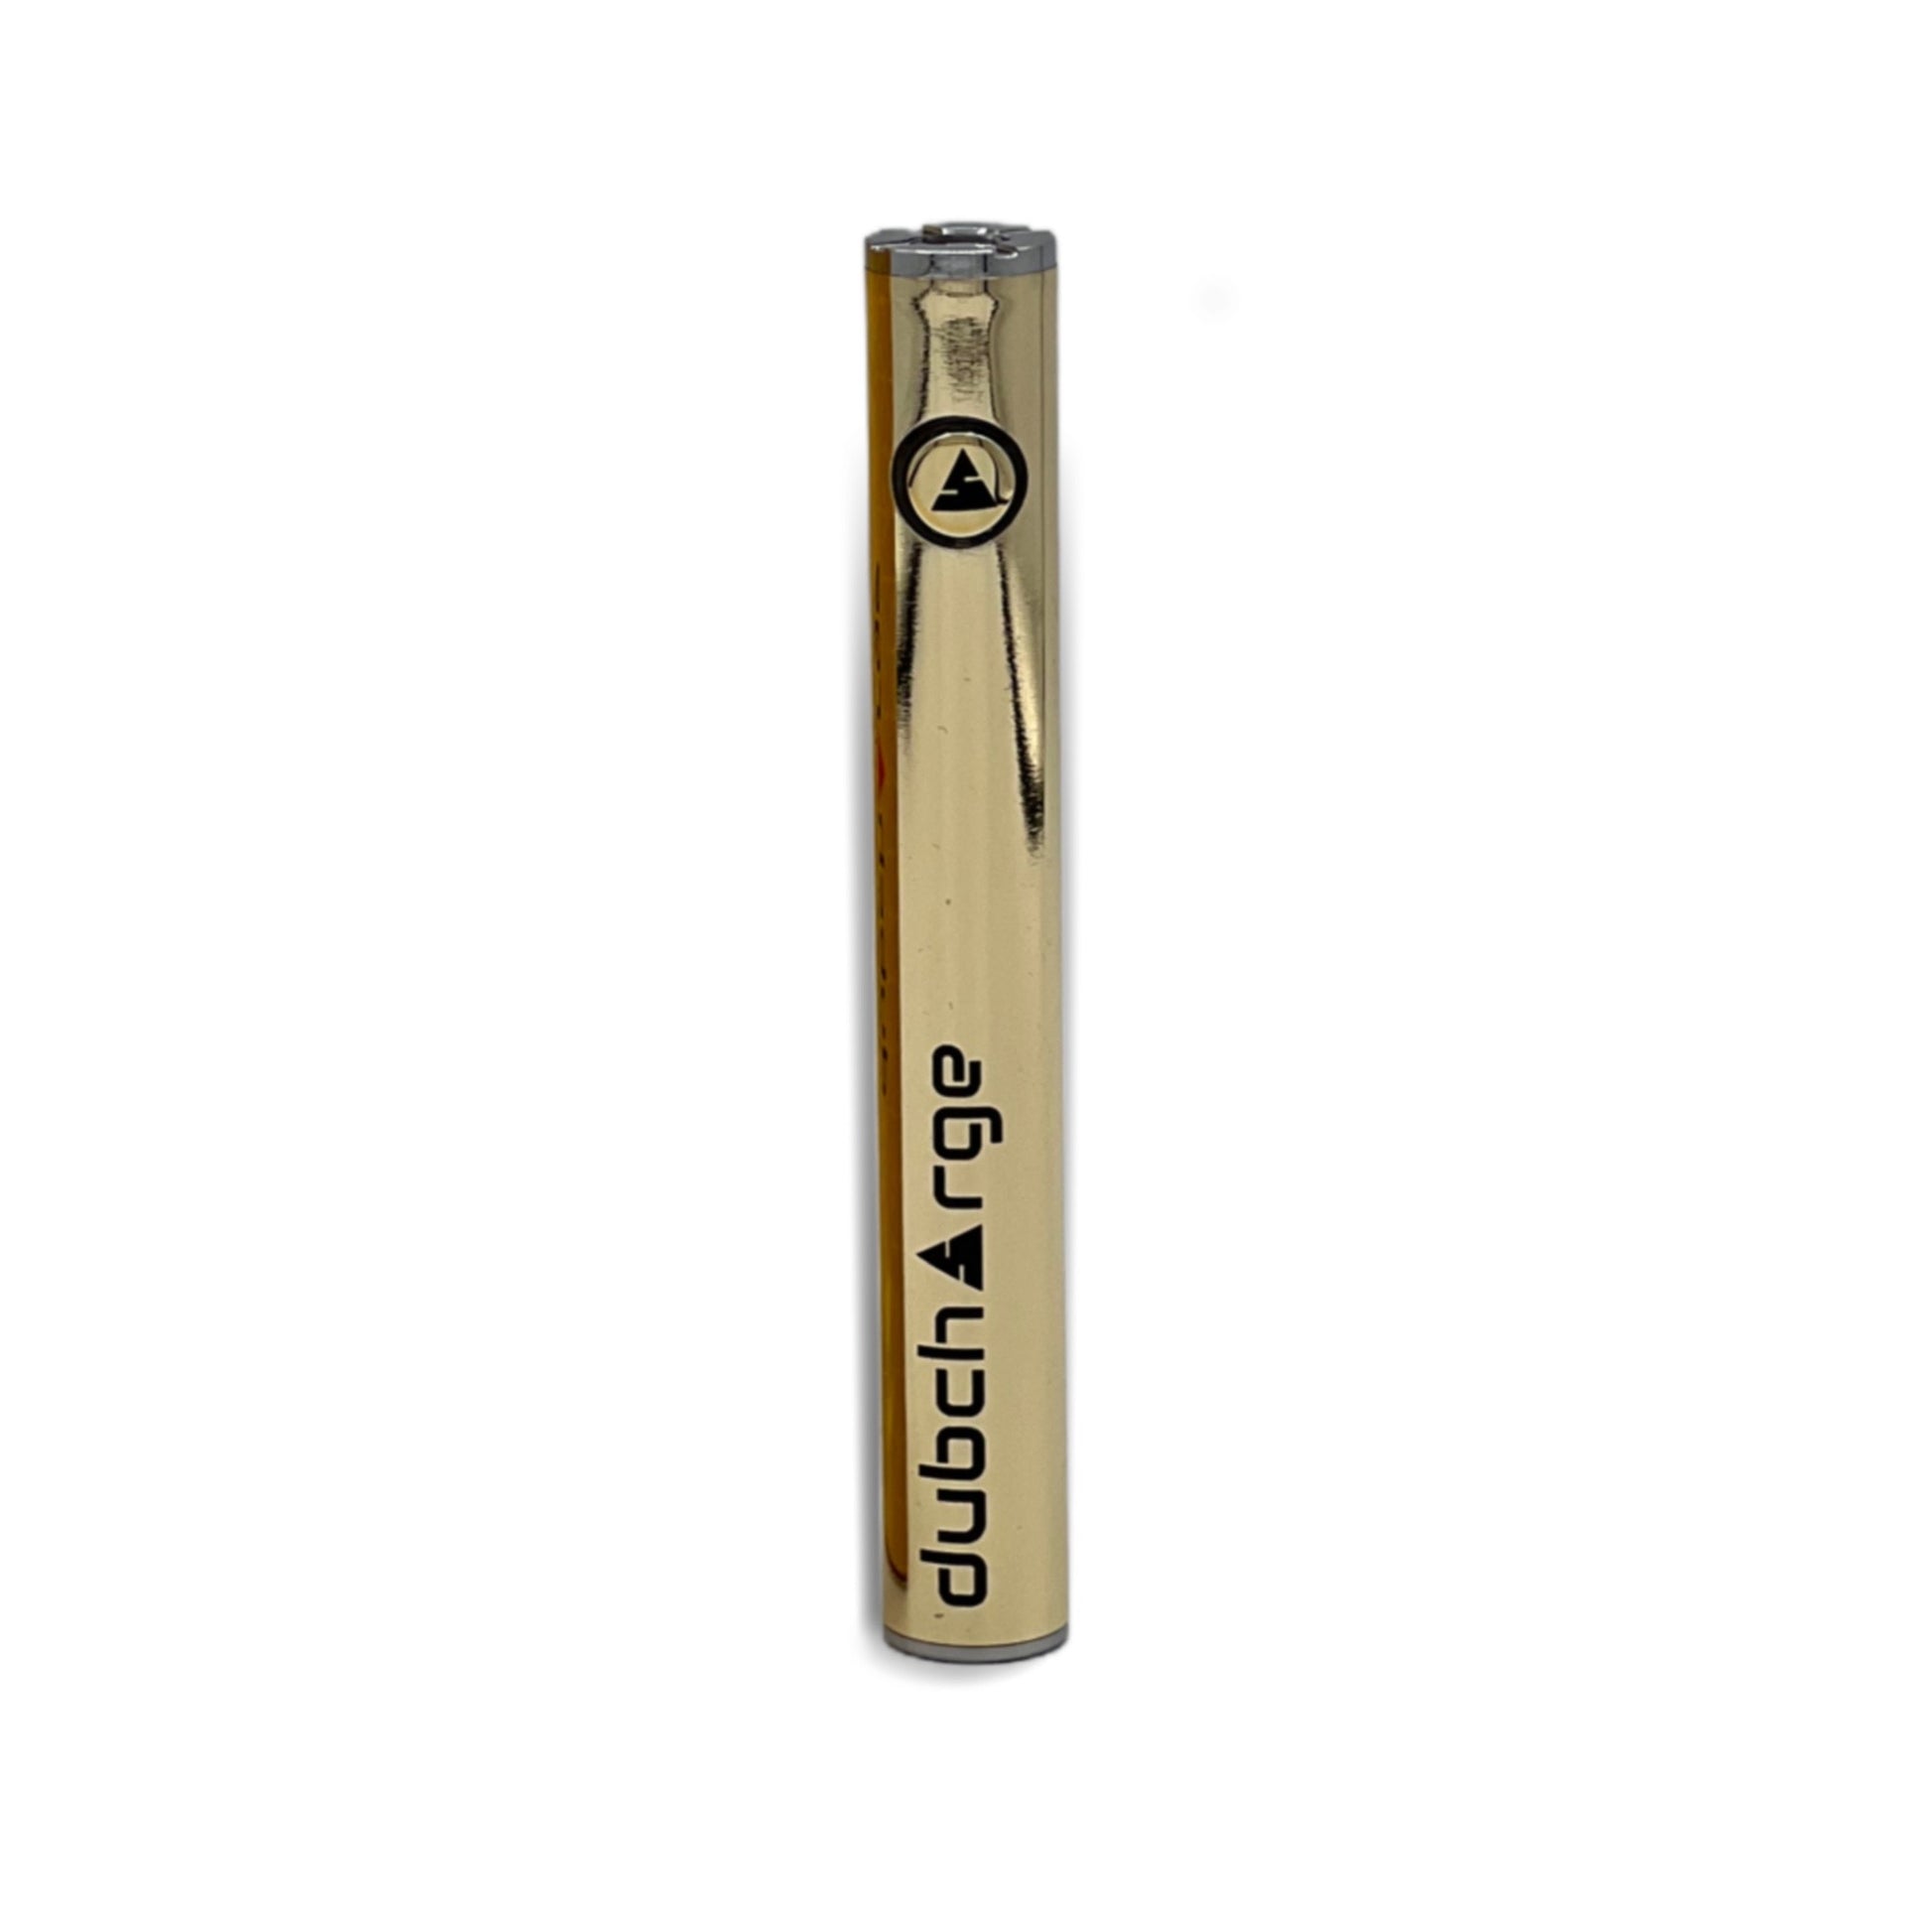 510 Thread Vaporizer Battery - 900 mAh - GOLD | High-Quality Battery for Vaping Devices